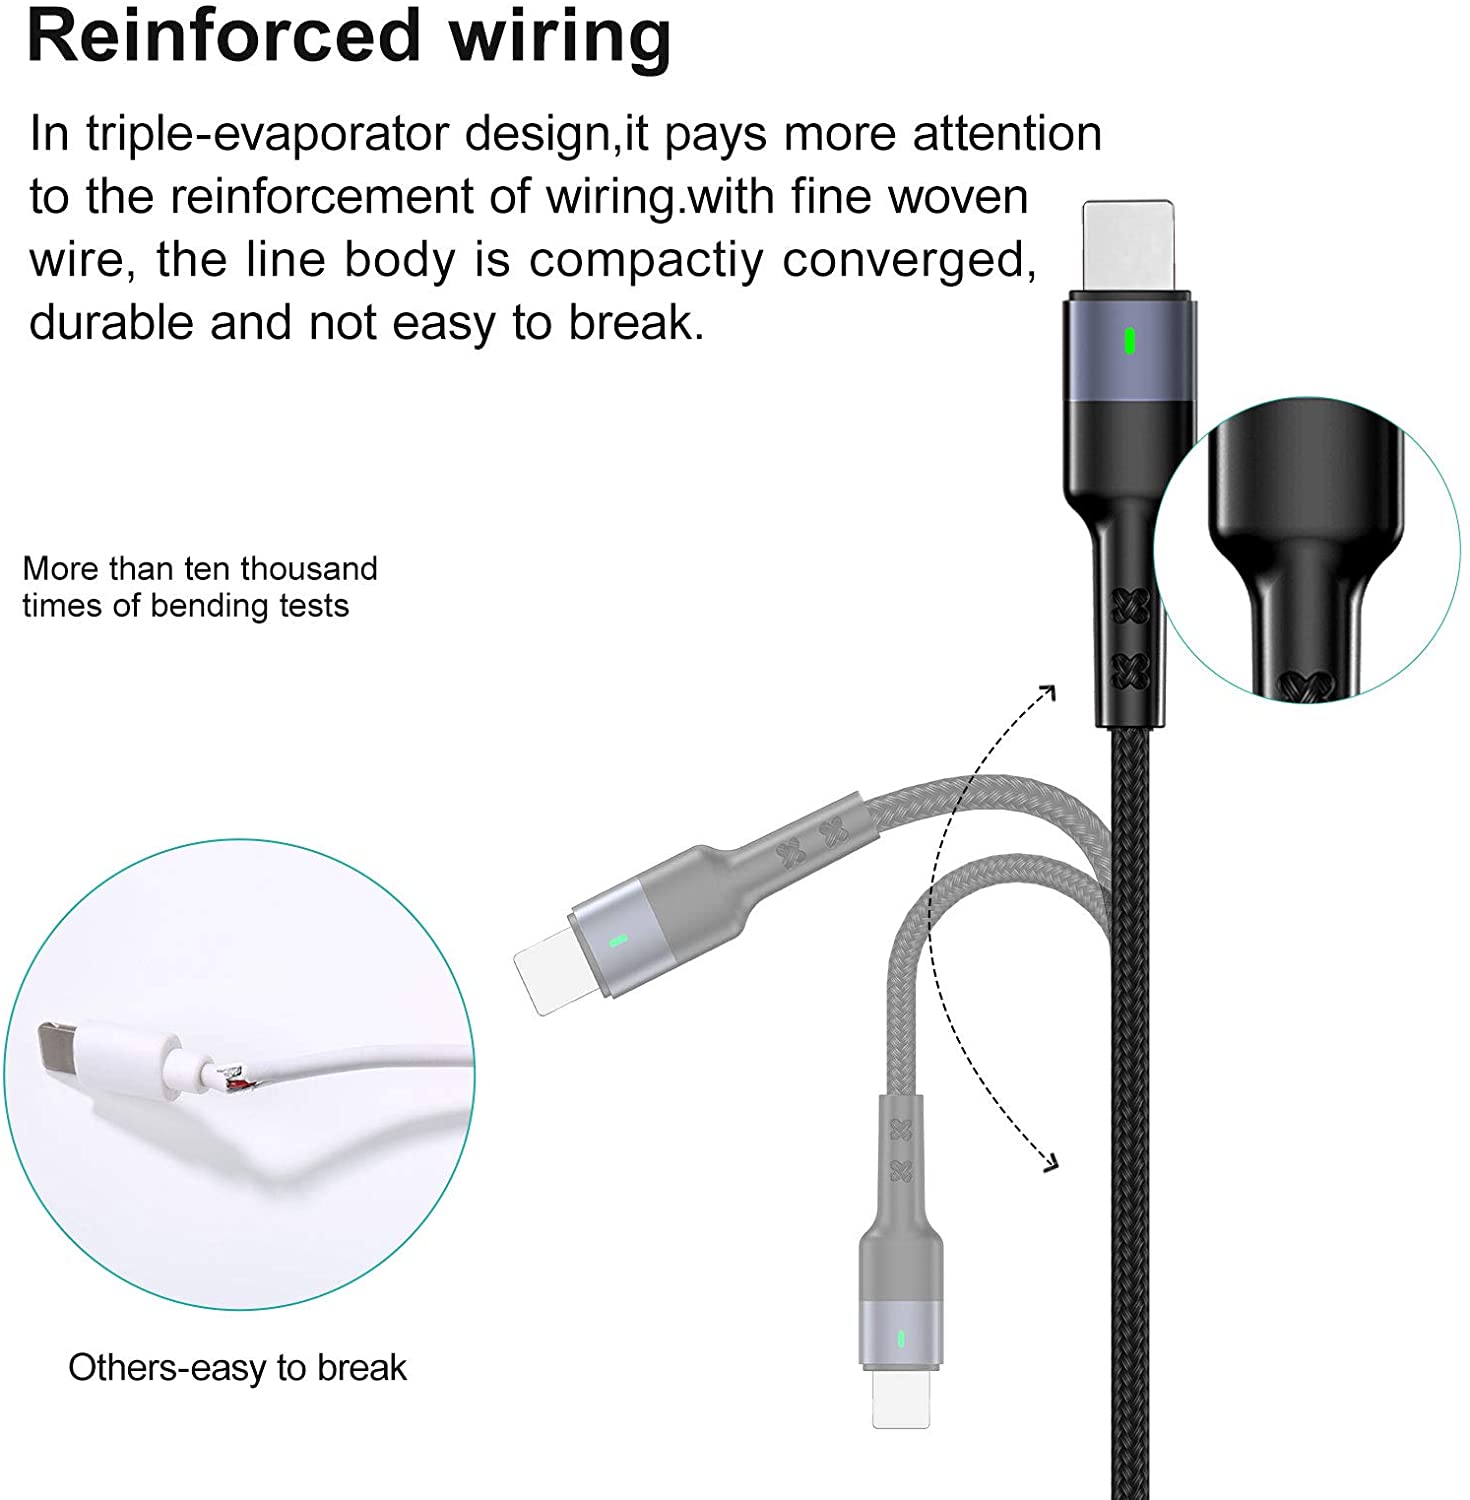 Multi Quick Charging Cable Popular Music Art Drumming Instrument Multi 3 in 1 Retractable Multi Cable Charger Fast Charge with Micro USB/Type C Compatible with Cell Phones Tablet